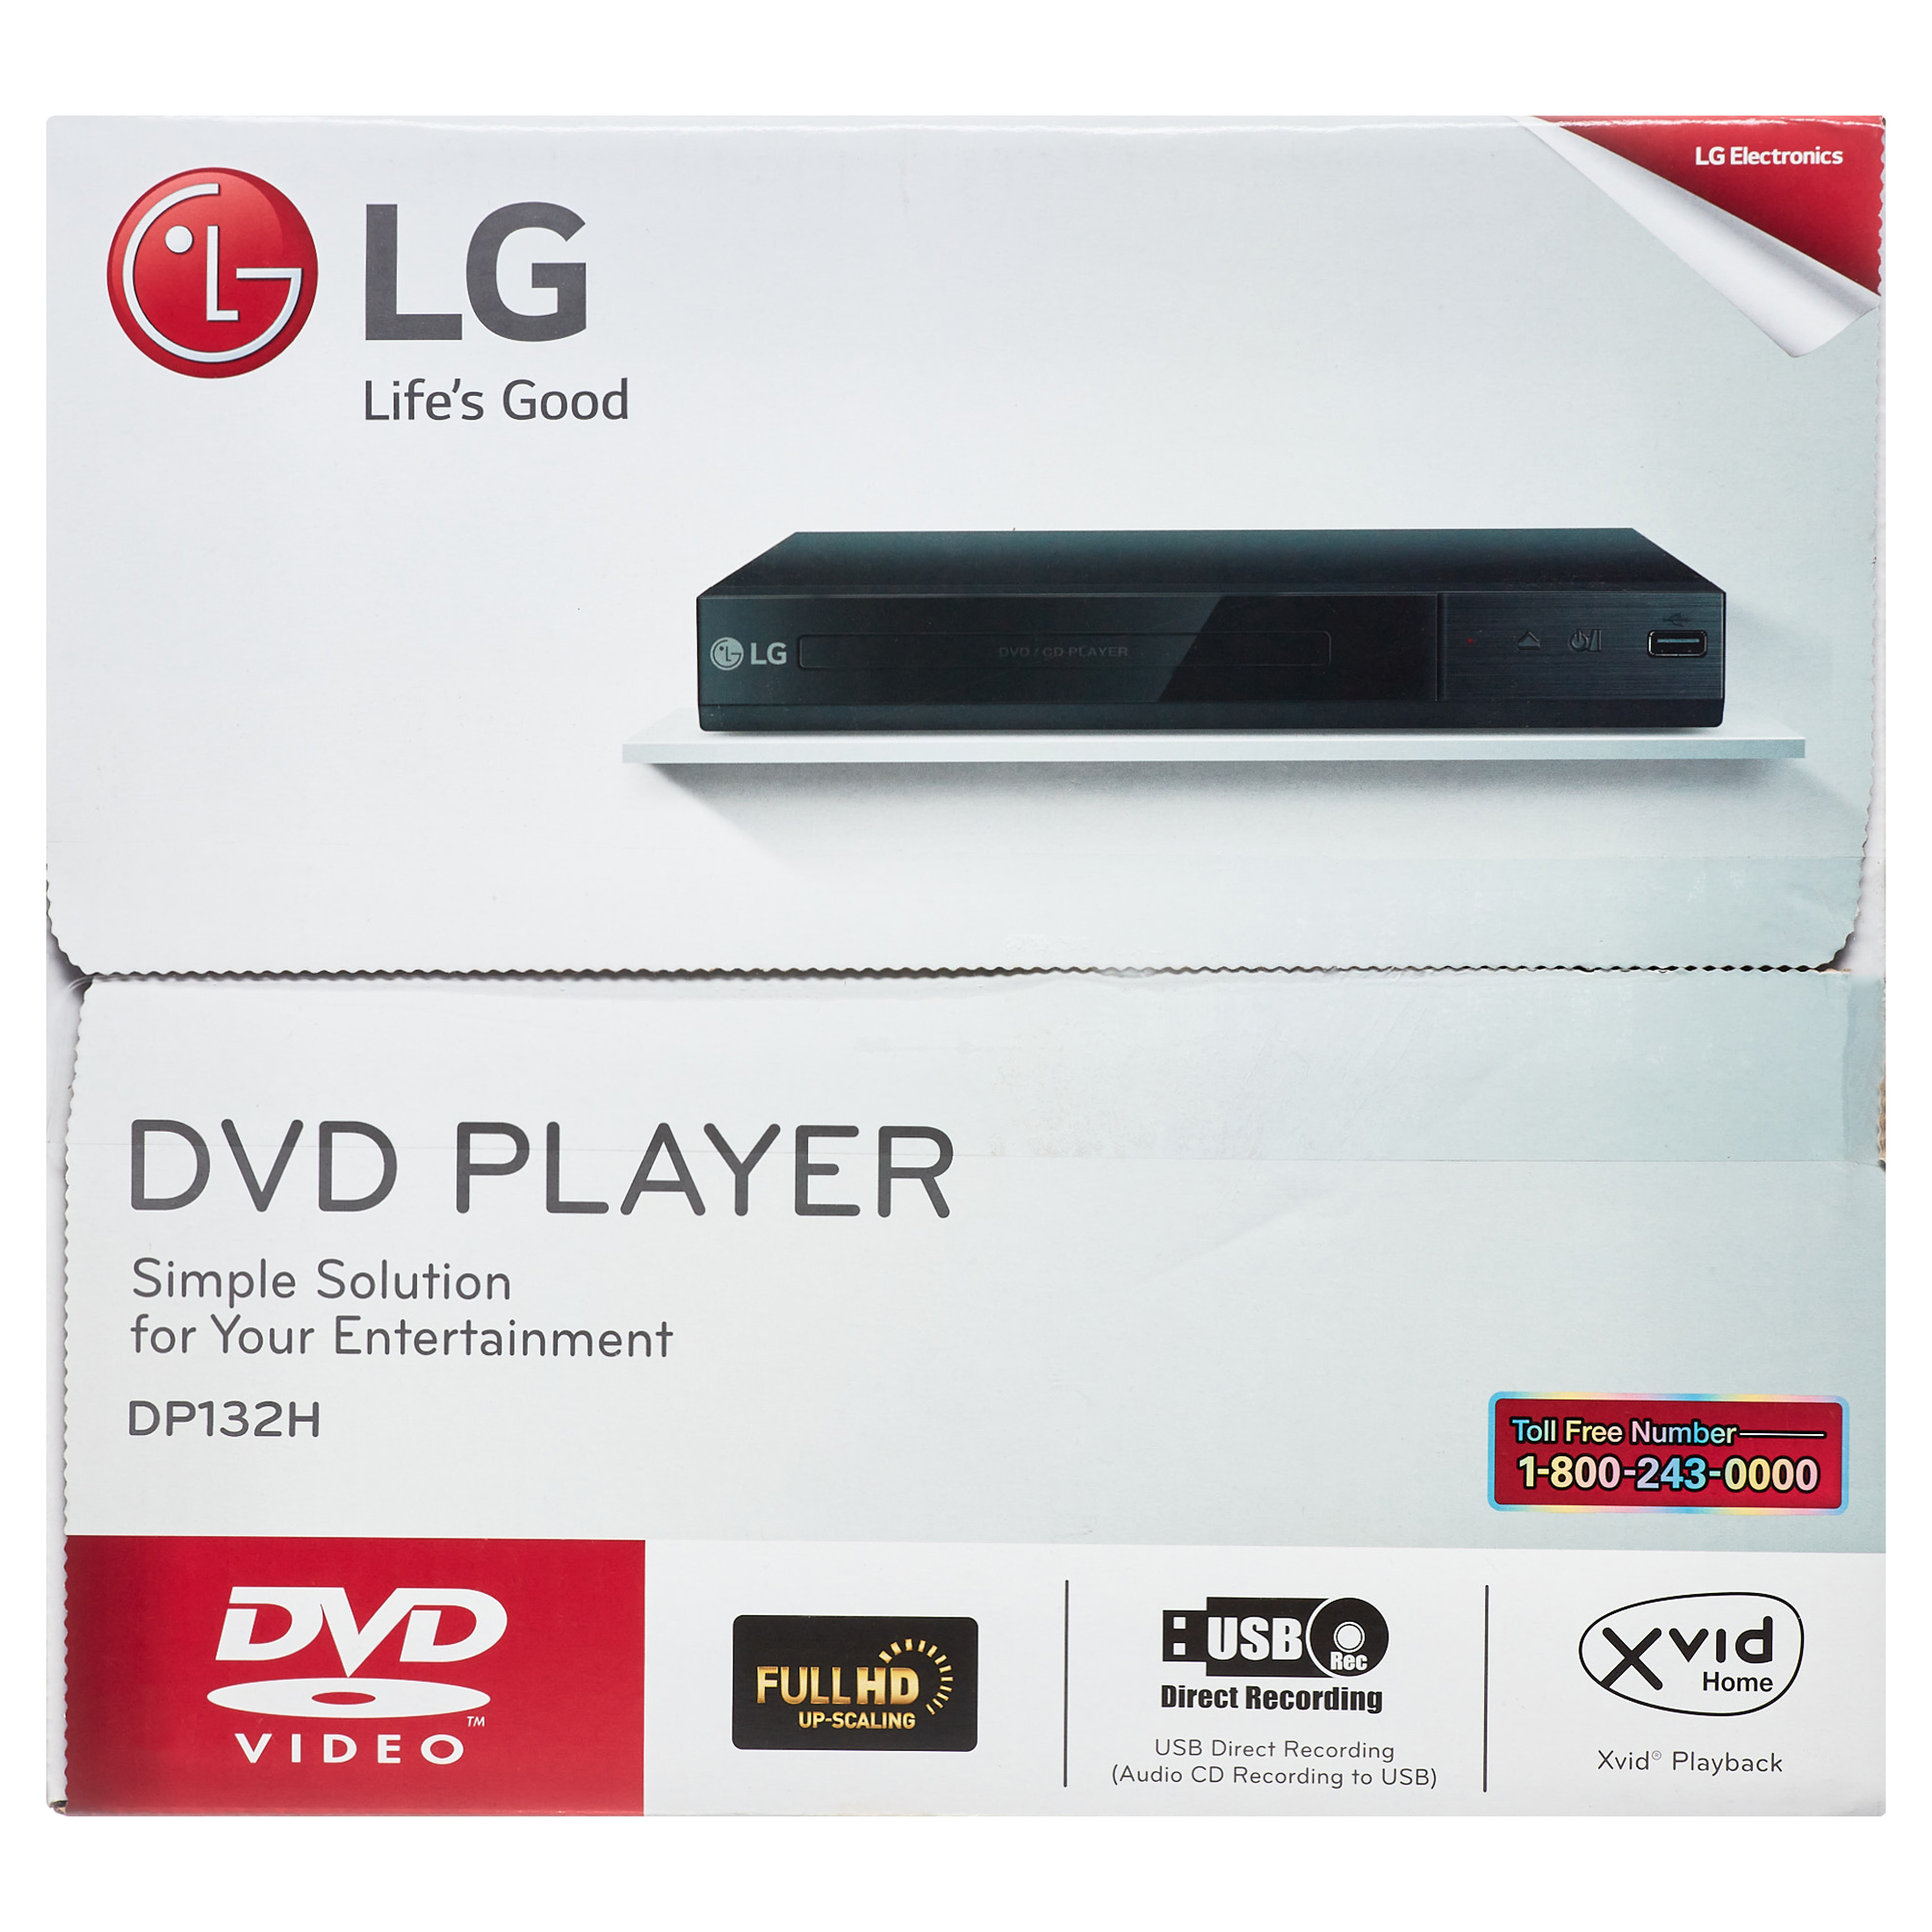 LG DP132H DVD Player Full HD Upscaling, Traditional DVD Playback, USB Playback, HDMI Out, USB Direct Recording, with Remote Control ? Black - image 1 of 13